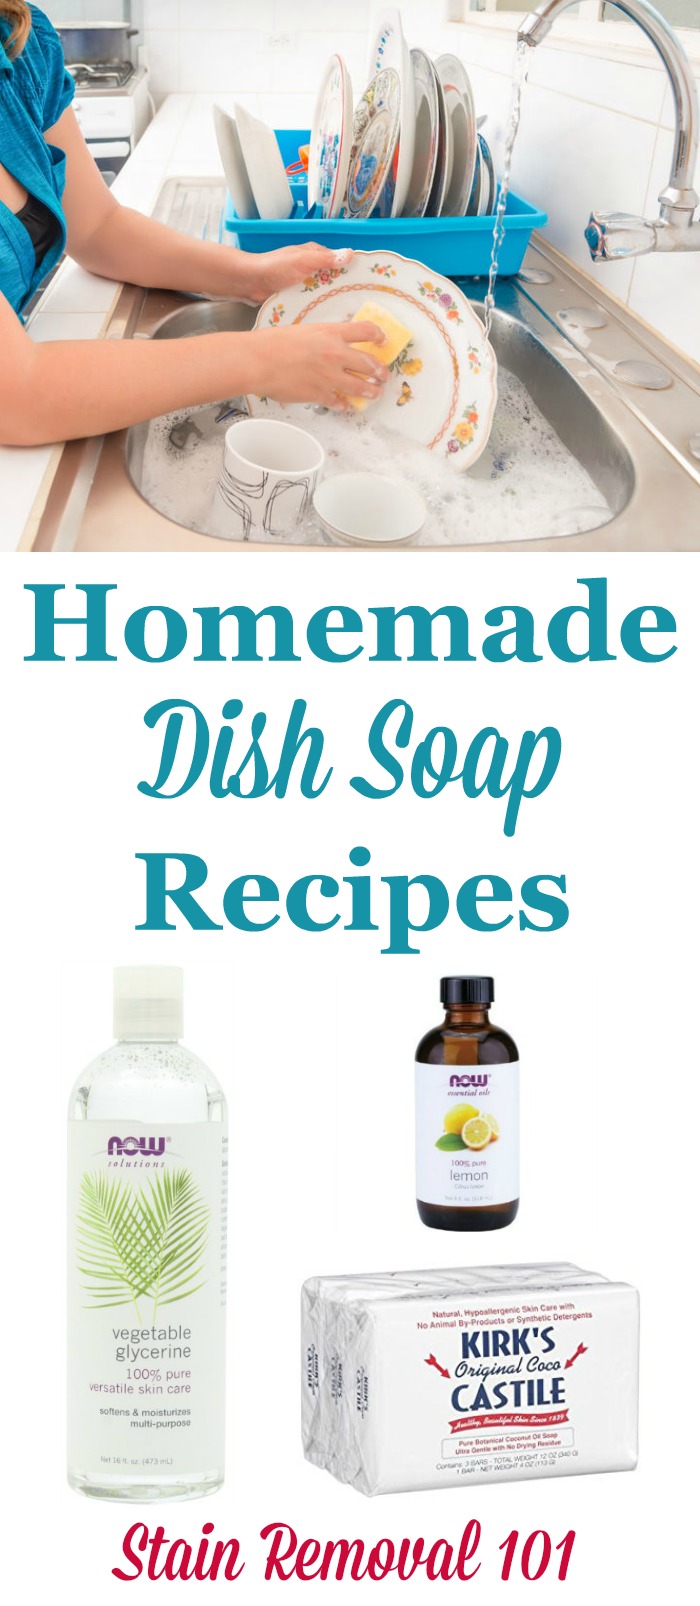 https://www.stain-removal-101.com/image-files/homemade-dish-soap-2.jpg